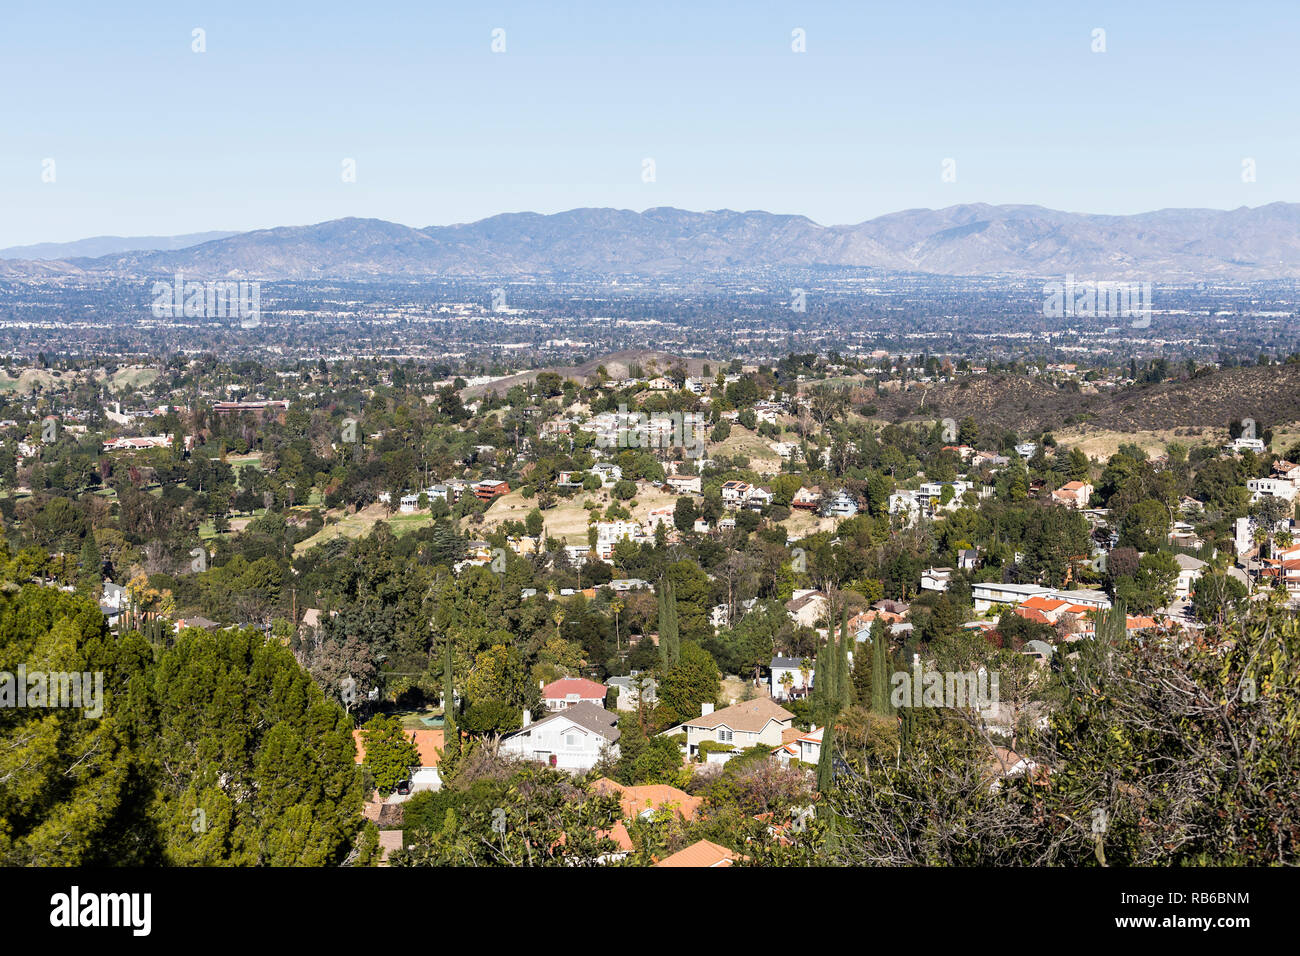 snapshots of time in Woodland Hills